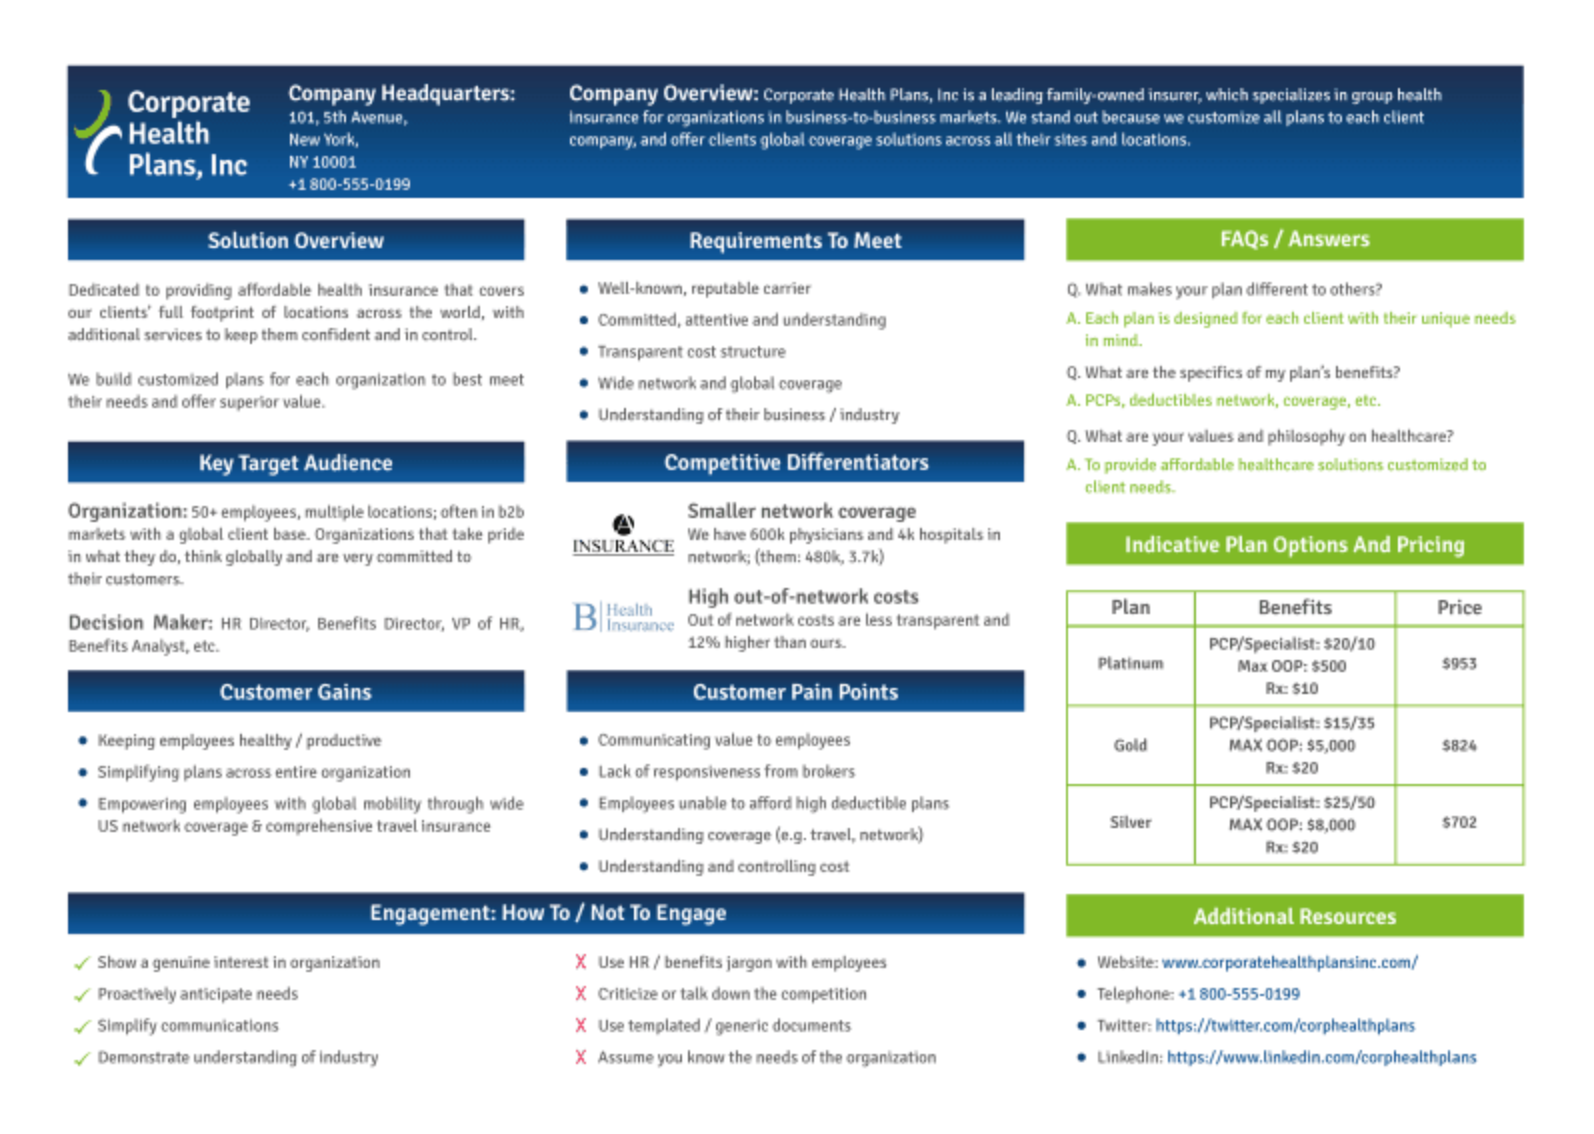 Example battlecard from Corporate Health Plans, Inc.